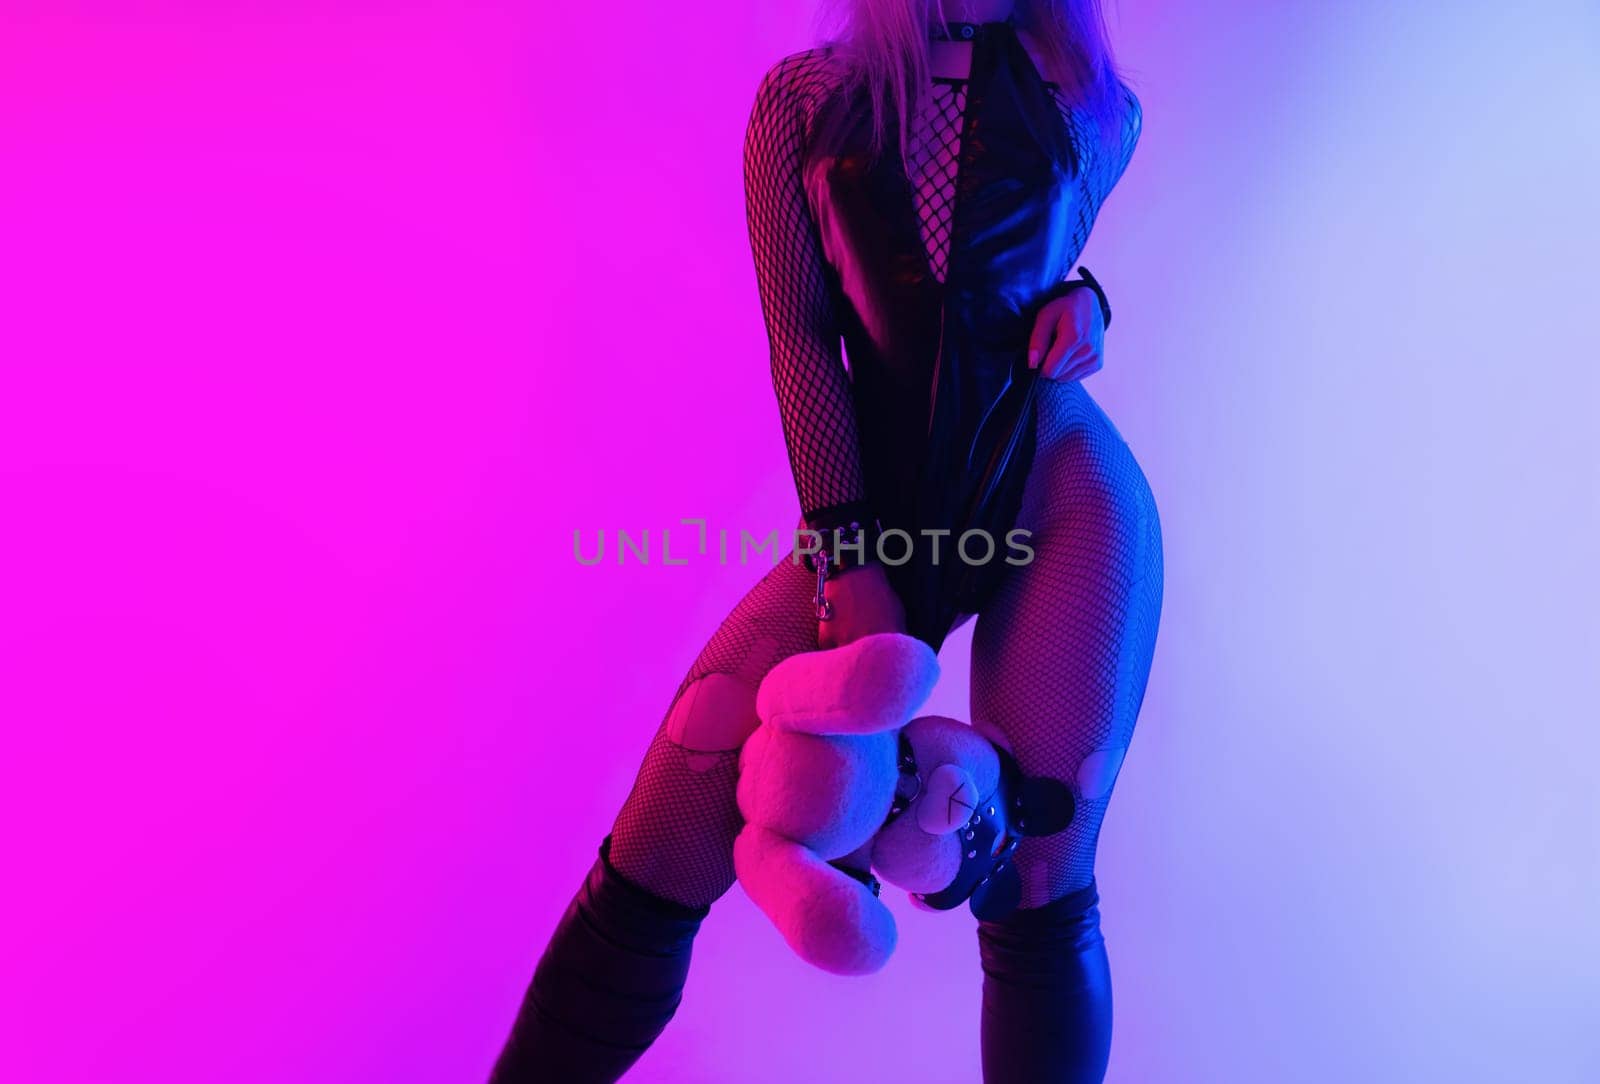 Sexy girl in a latex BDSM mistress dress and a cat mask in neon light on a dark background for sex game